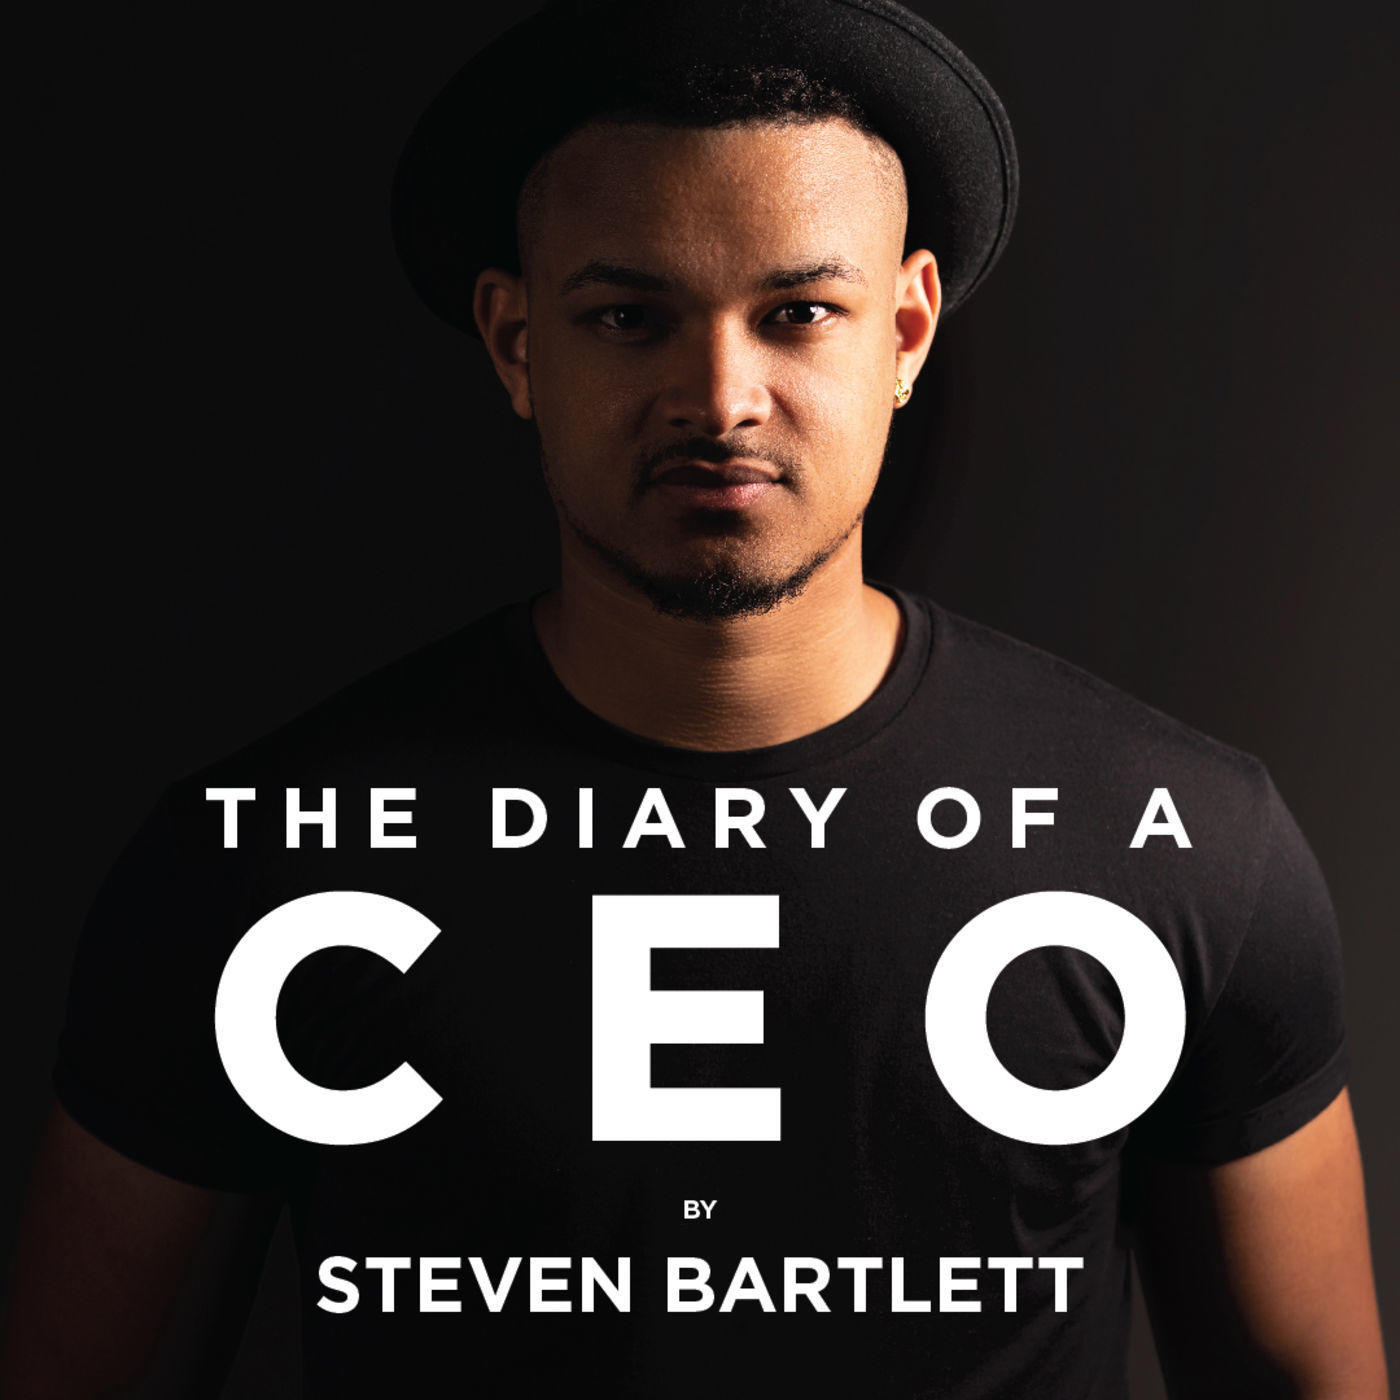 The Diary Of A CEO by Steven Bartlett